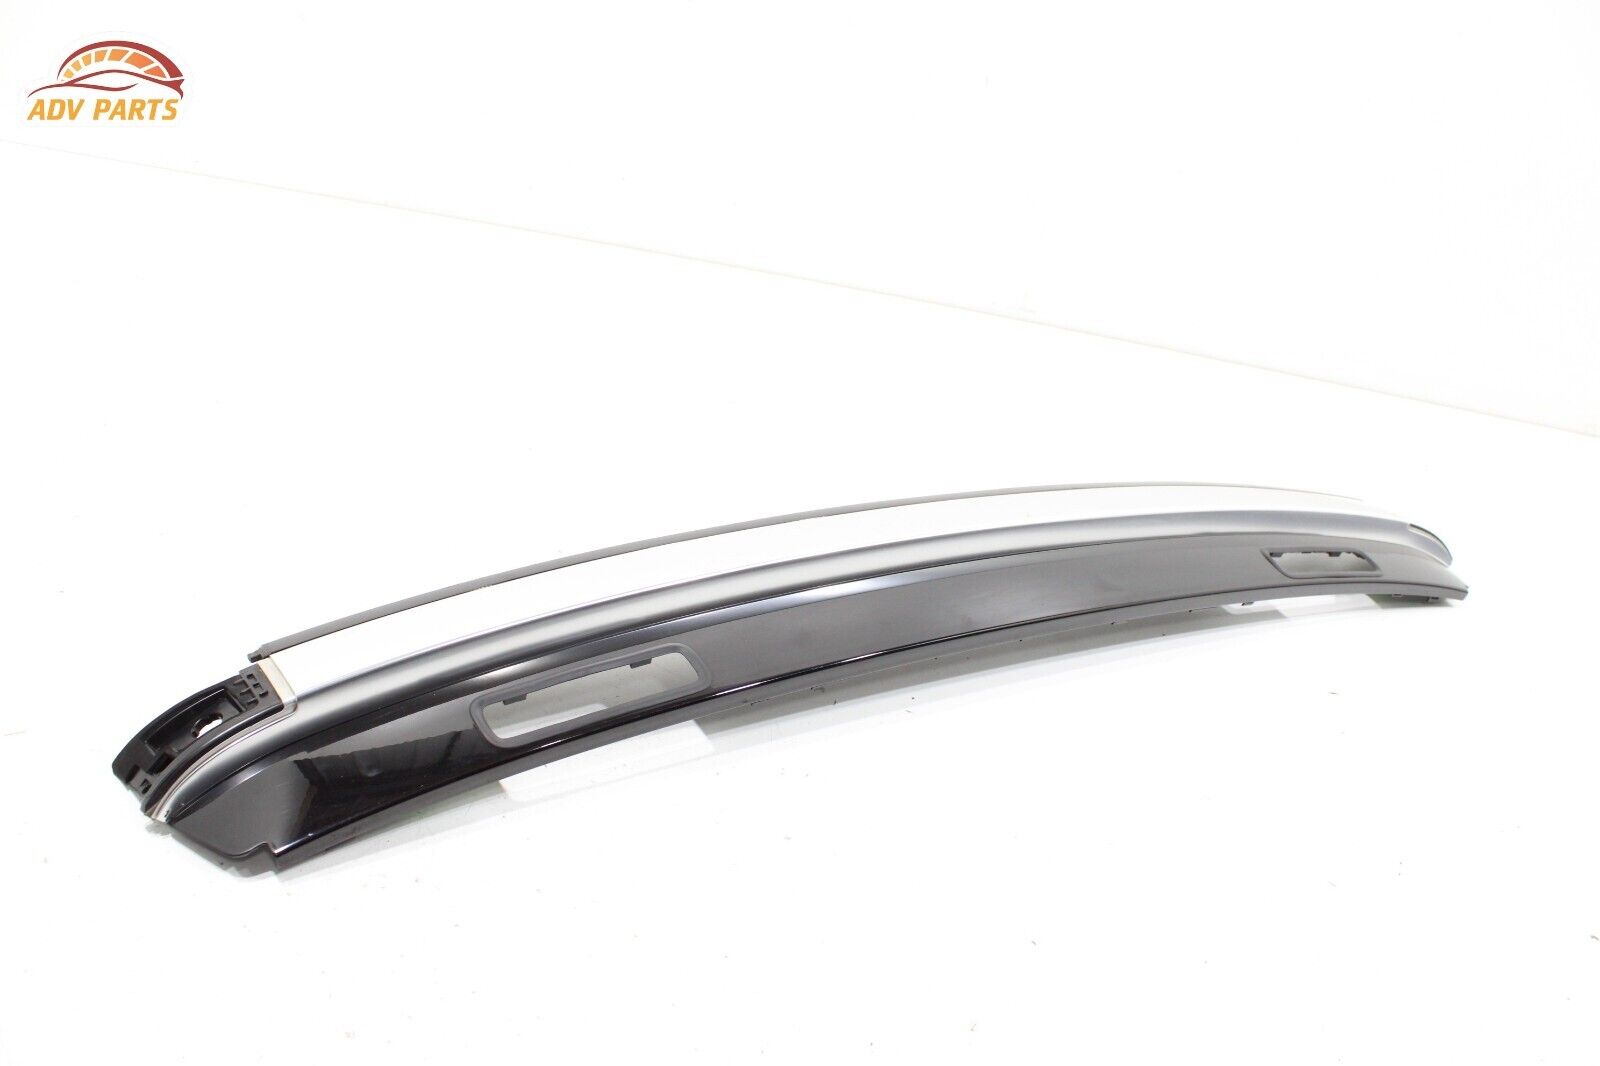 AUDI A5 CONVERTIBLE WINDSHIELD UPPER HEADER COVER MOLDING OEM 2018 - 2023 💎